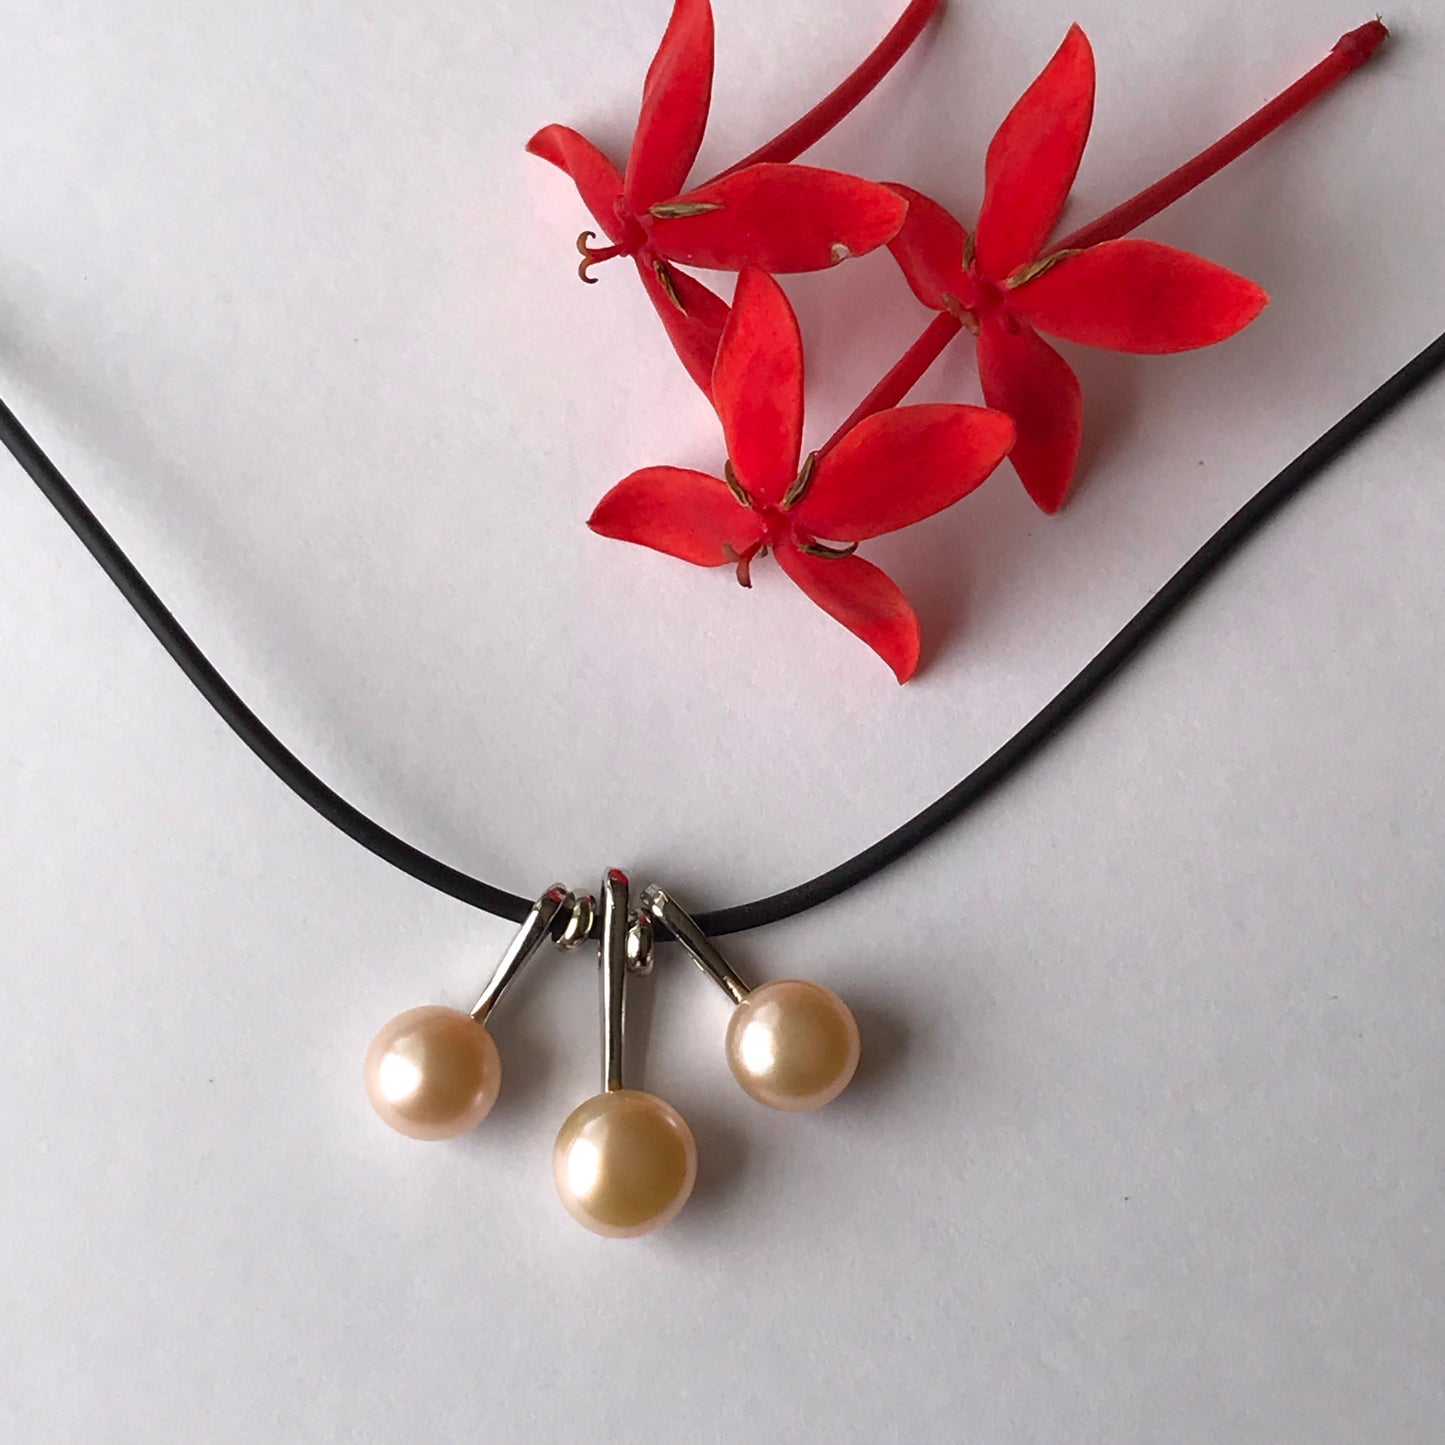 3 pearl necklace on a leather cord  necklace - The Lotus Wave 